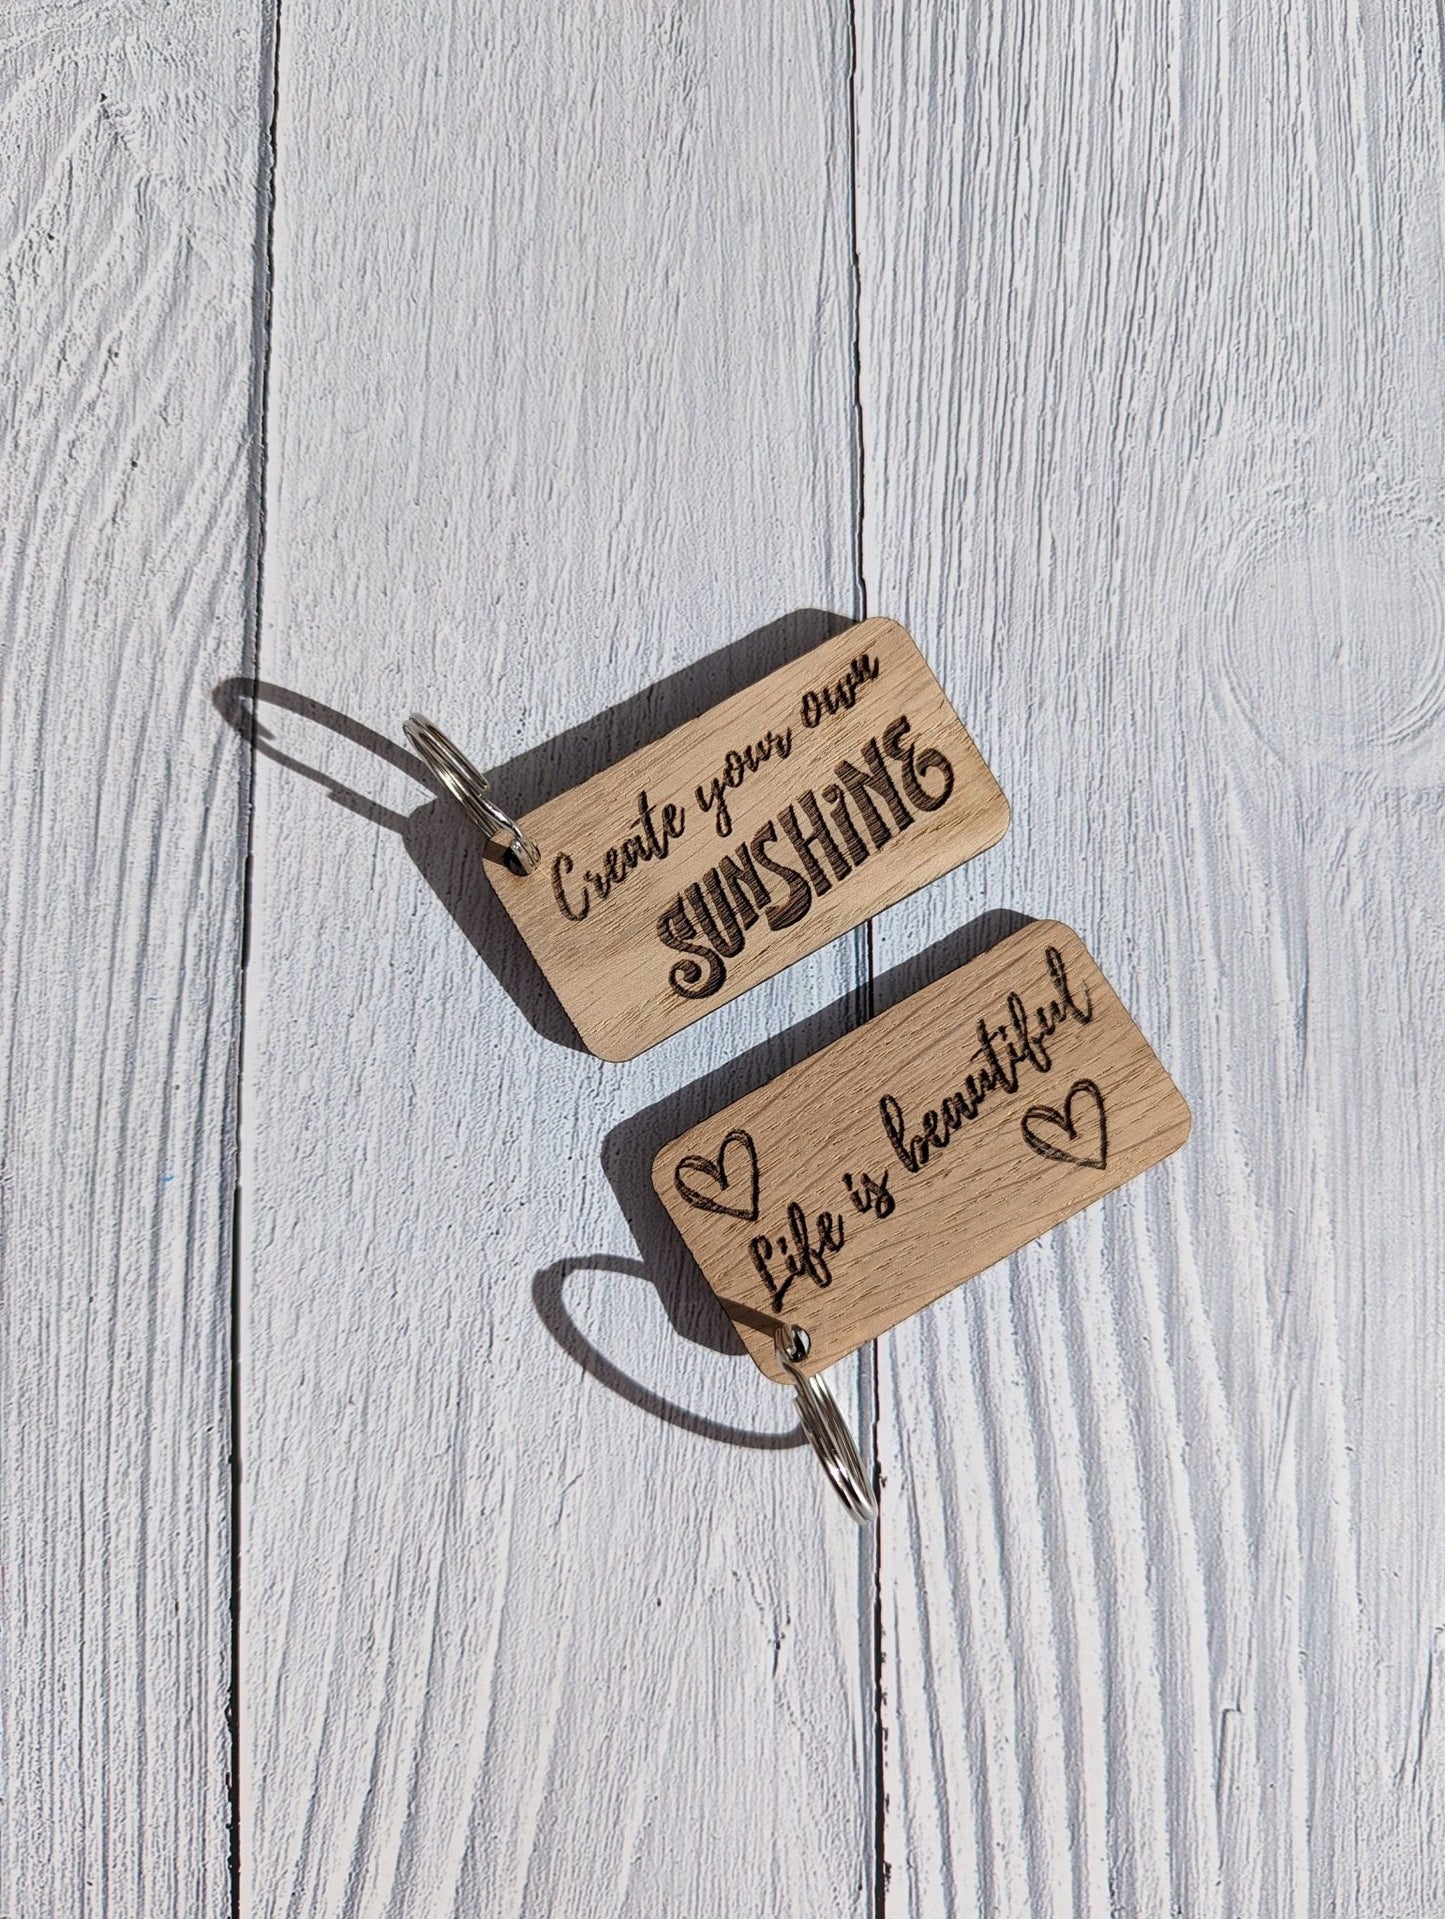 Uplifting Keyrings - 'Create Your Own Sunshine' or 'Life is Beautiful' - CherryGroveCraft